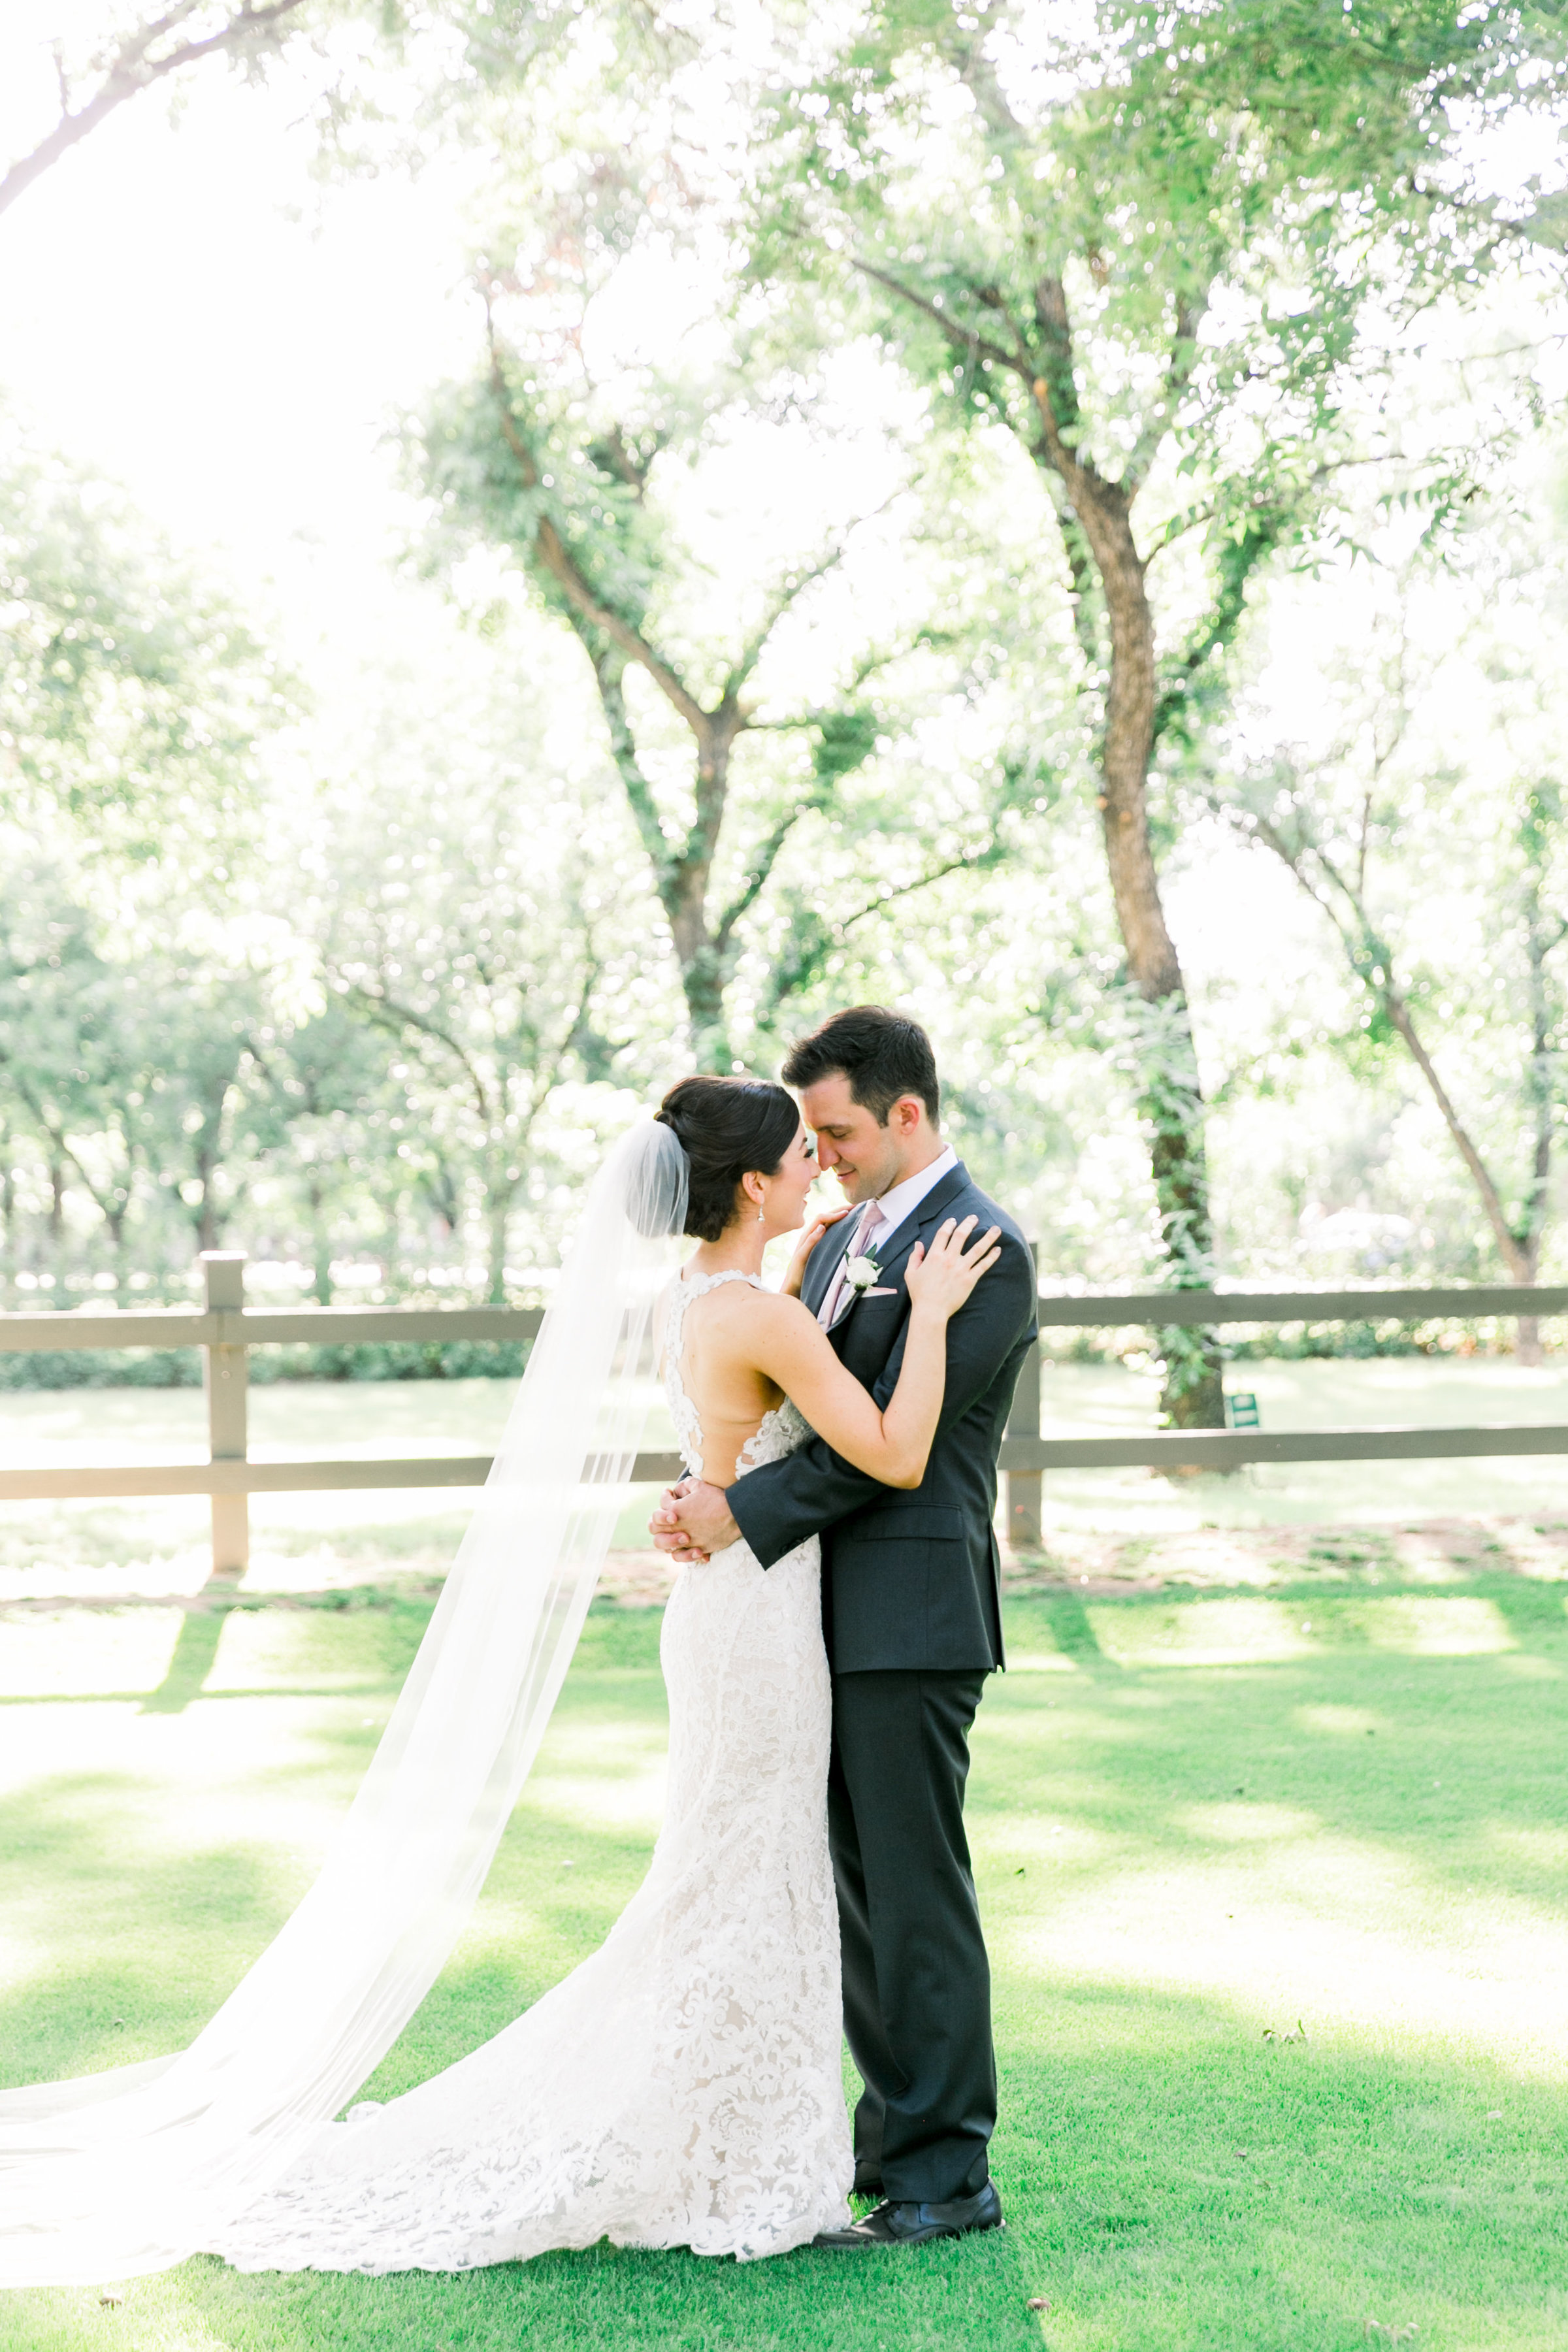 Karlie Colleen Photography - Venue At The Grove - Arizona Wedding - Maggie & Grant -57